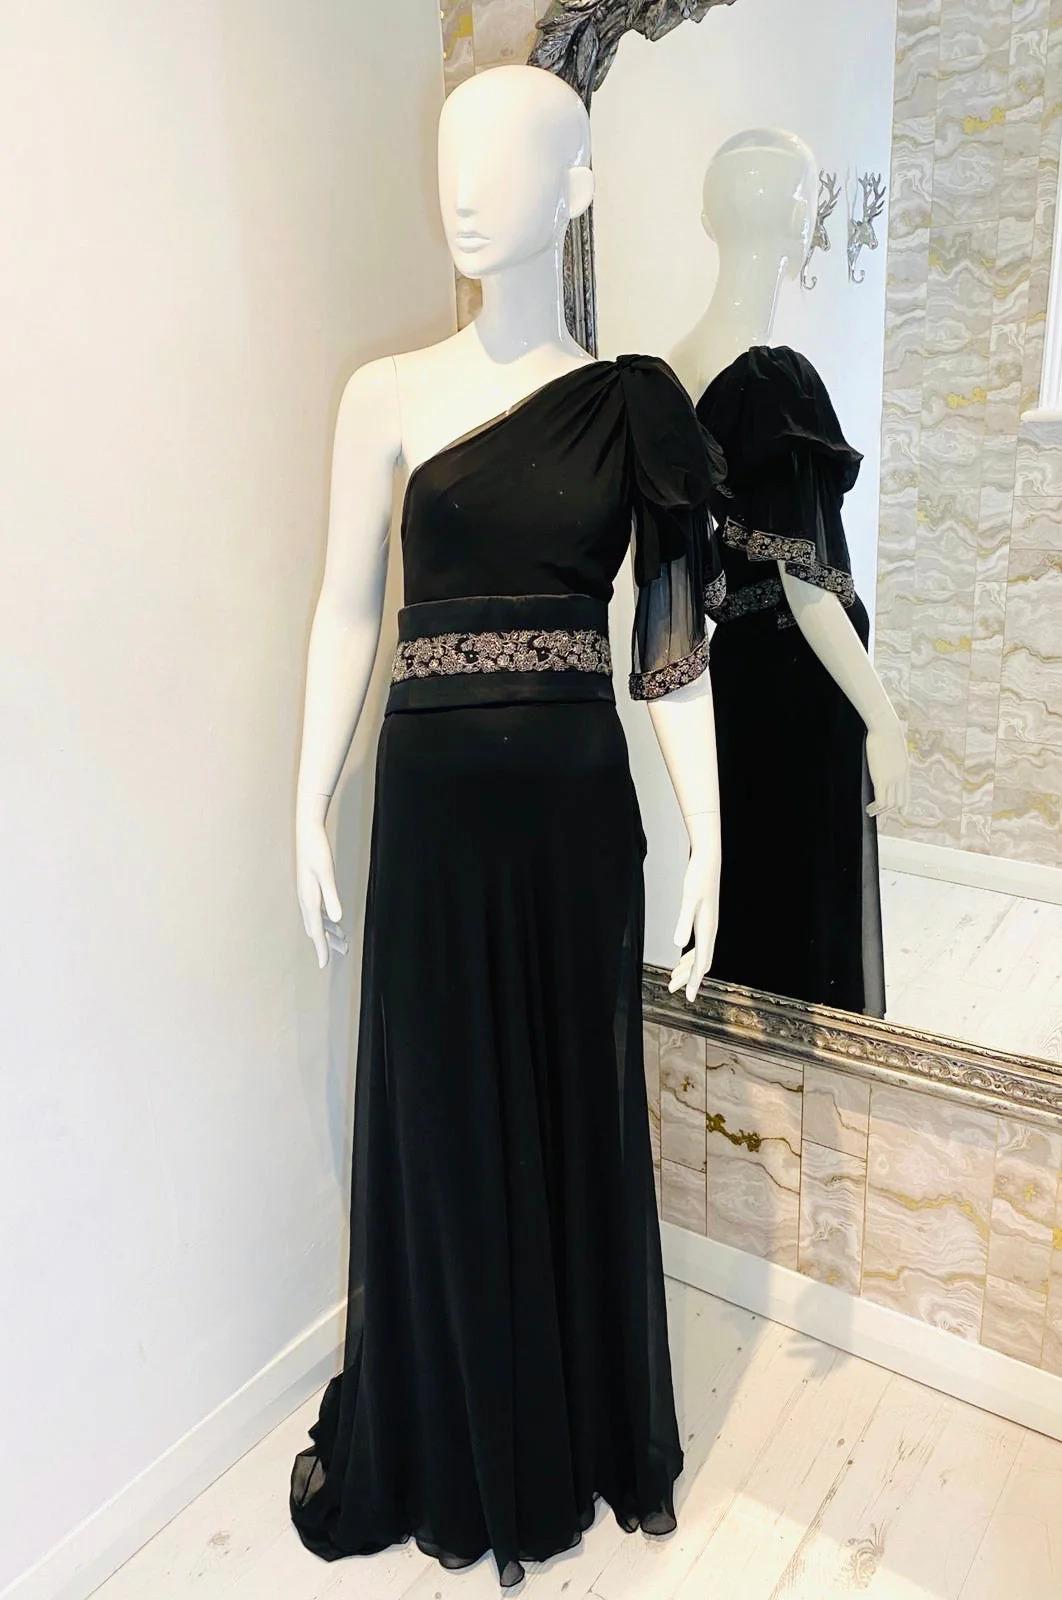 Marchesa Silk & Crystal Gown

Stunning black one shoulder gown in silk. Embellished with a removable crystal belt and one shoulder trimmed to match.

Additional information:
Size – 8US=12UK
Composition - Silk
Condition – Very Good (A few pulls)